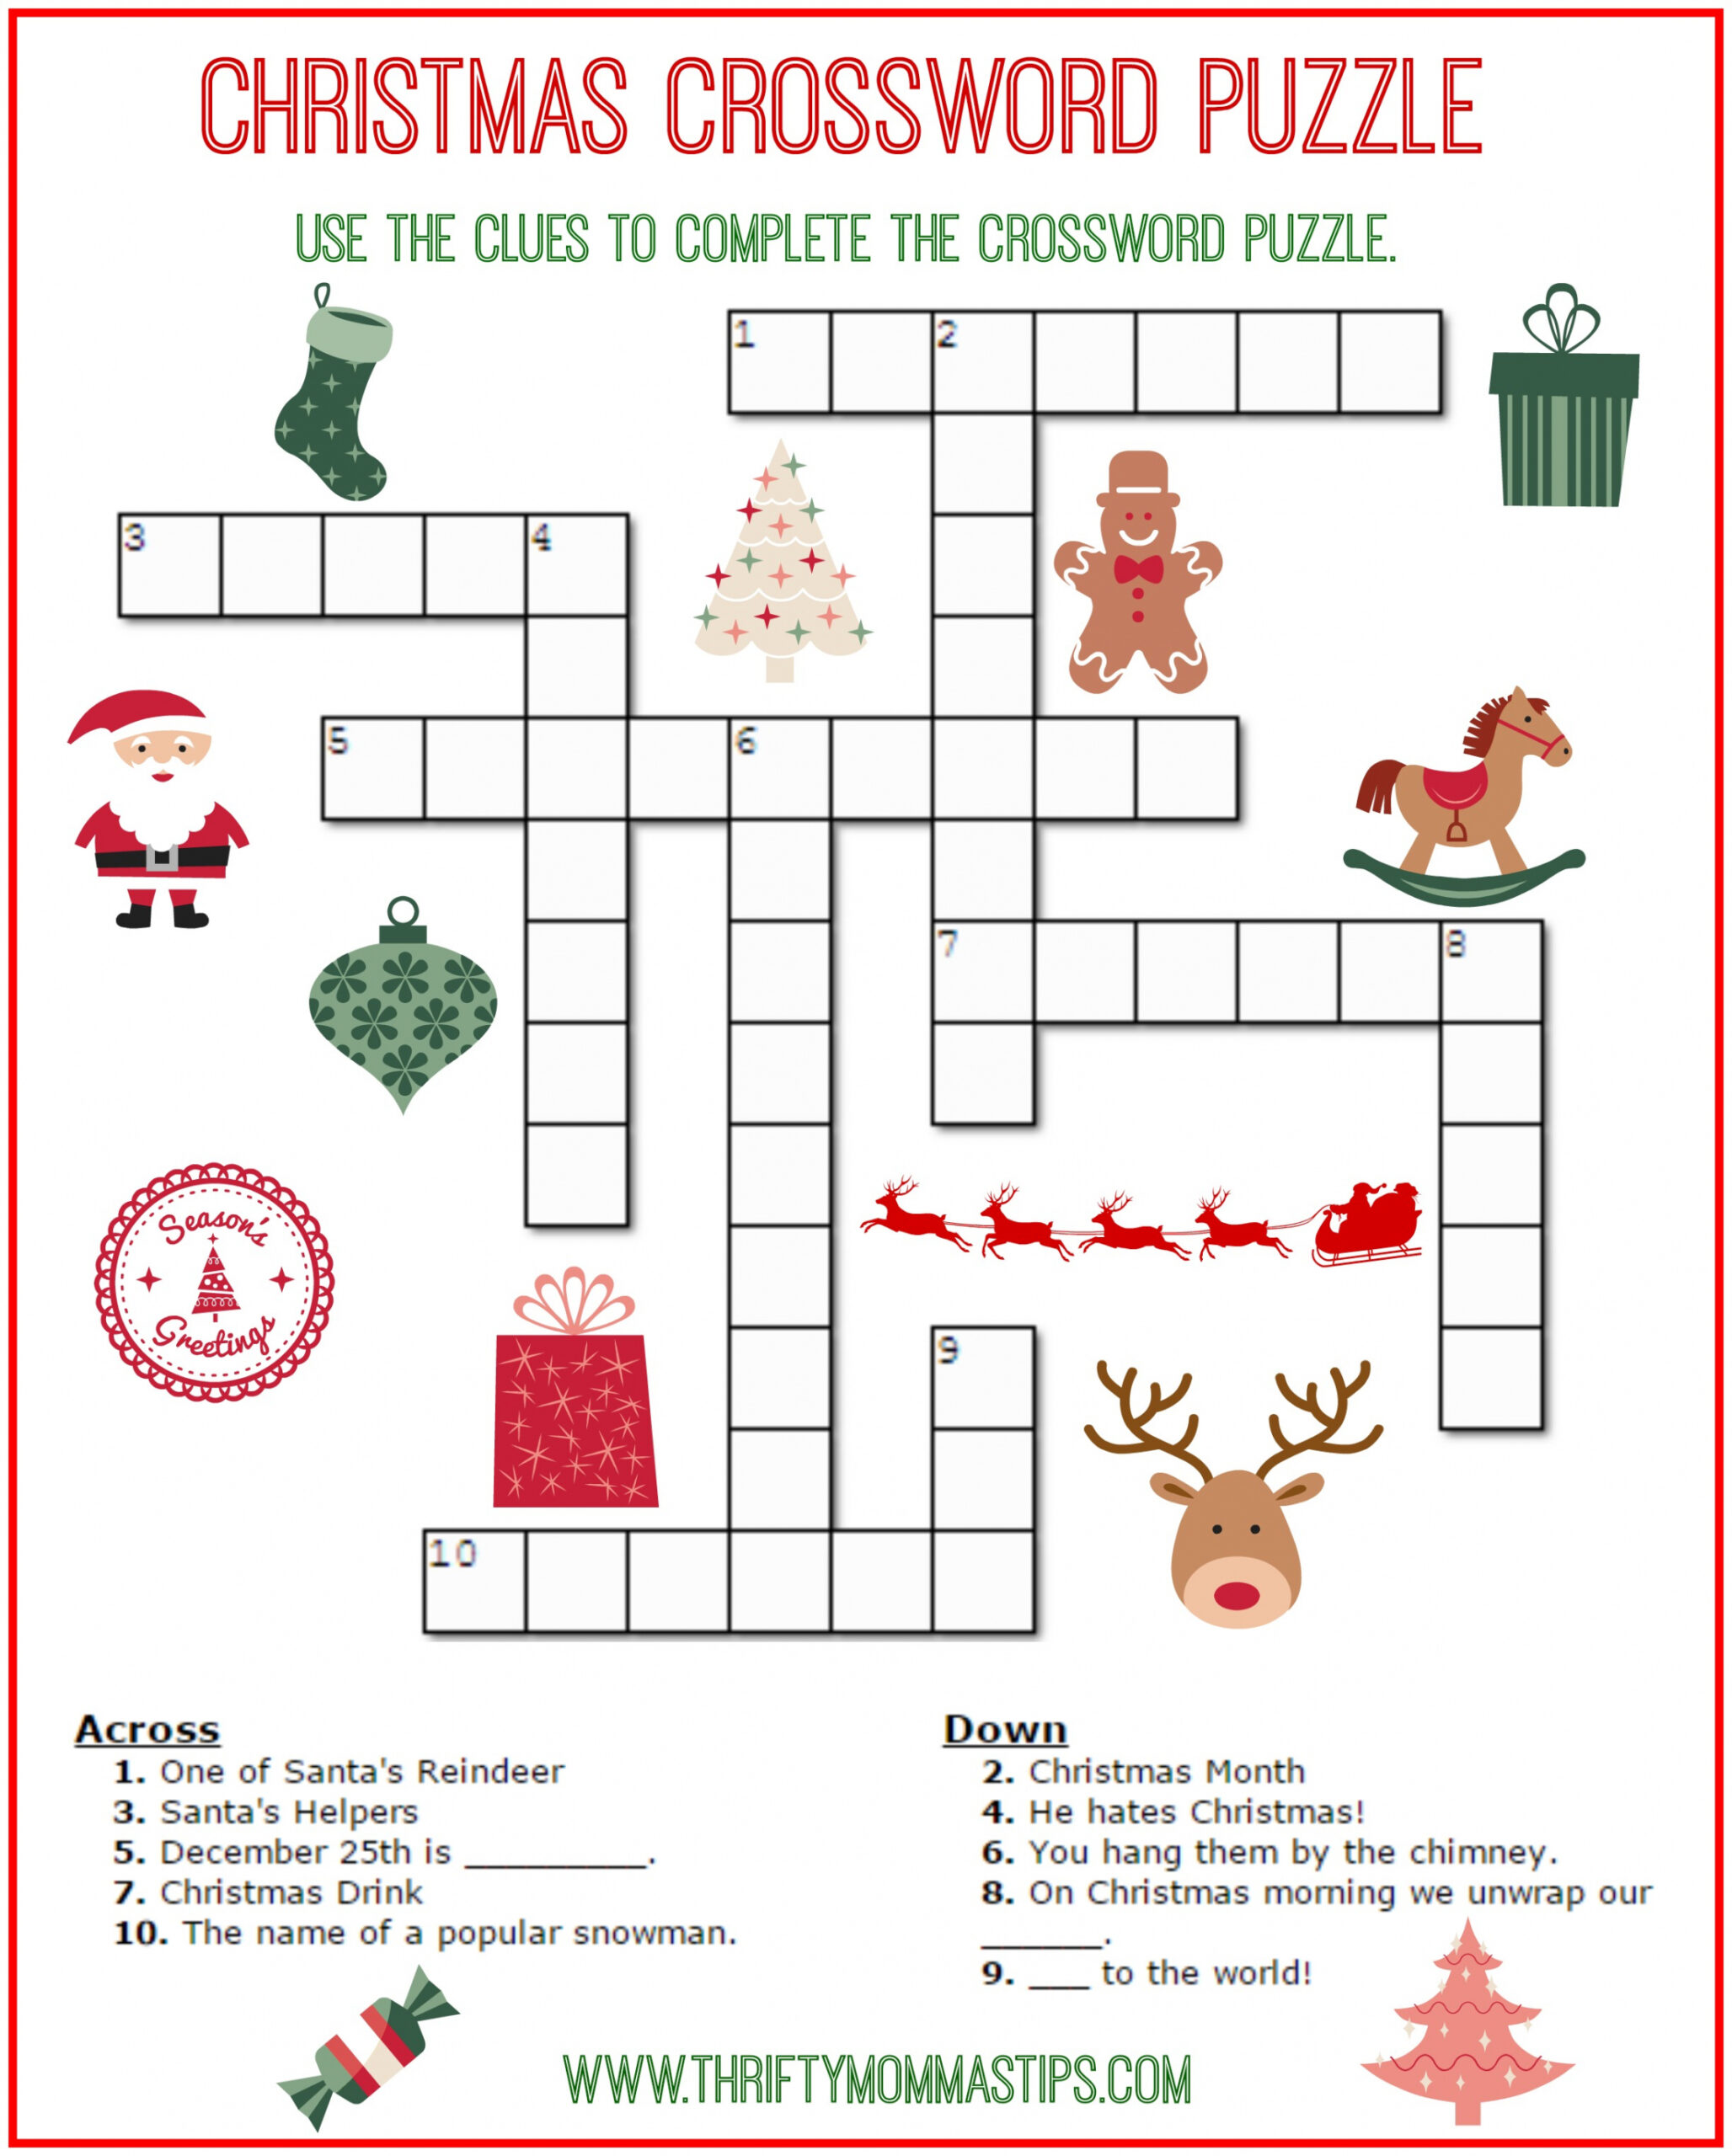 Free Printable Crossword Puzzles For Kids - Printable - Christmas Crossword Puzzle Printable - Thrifty Momma